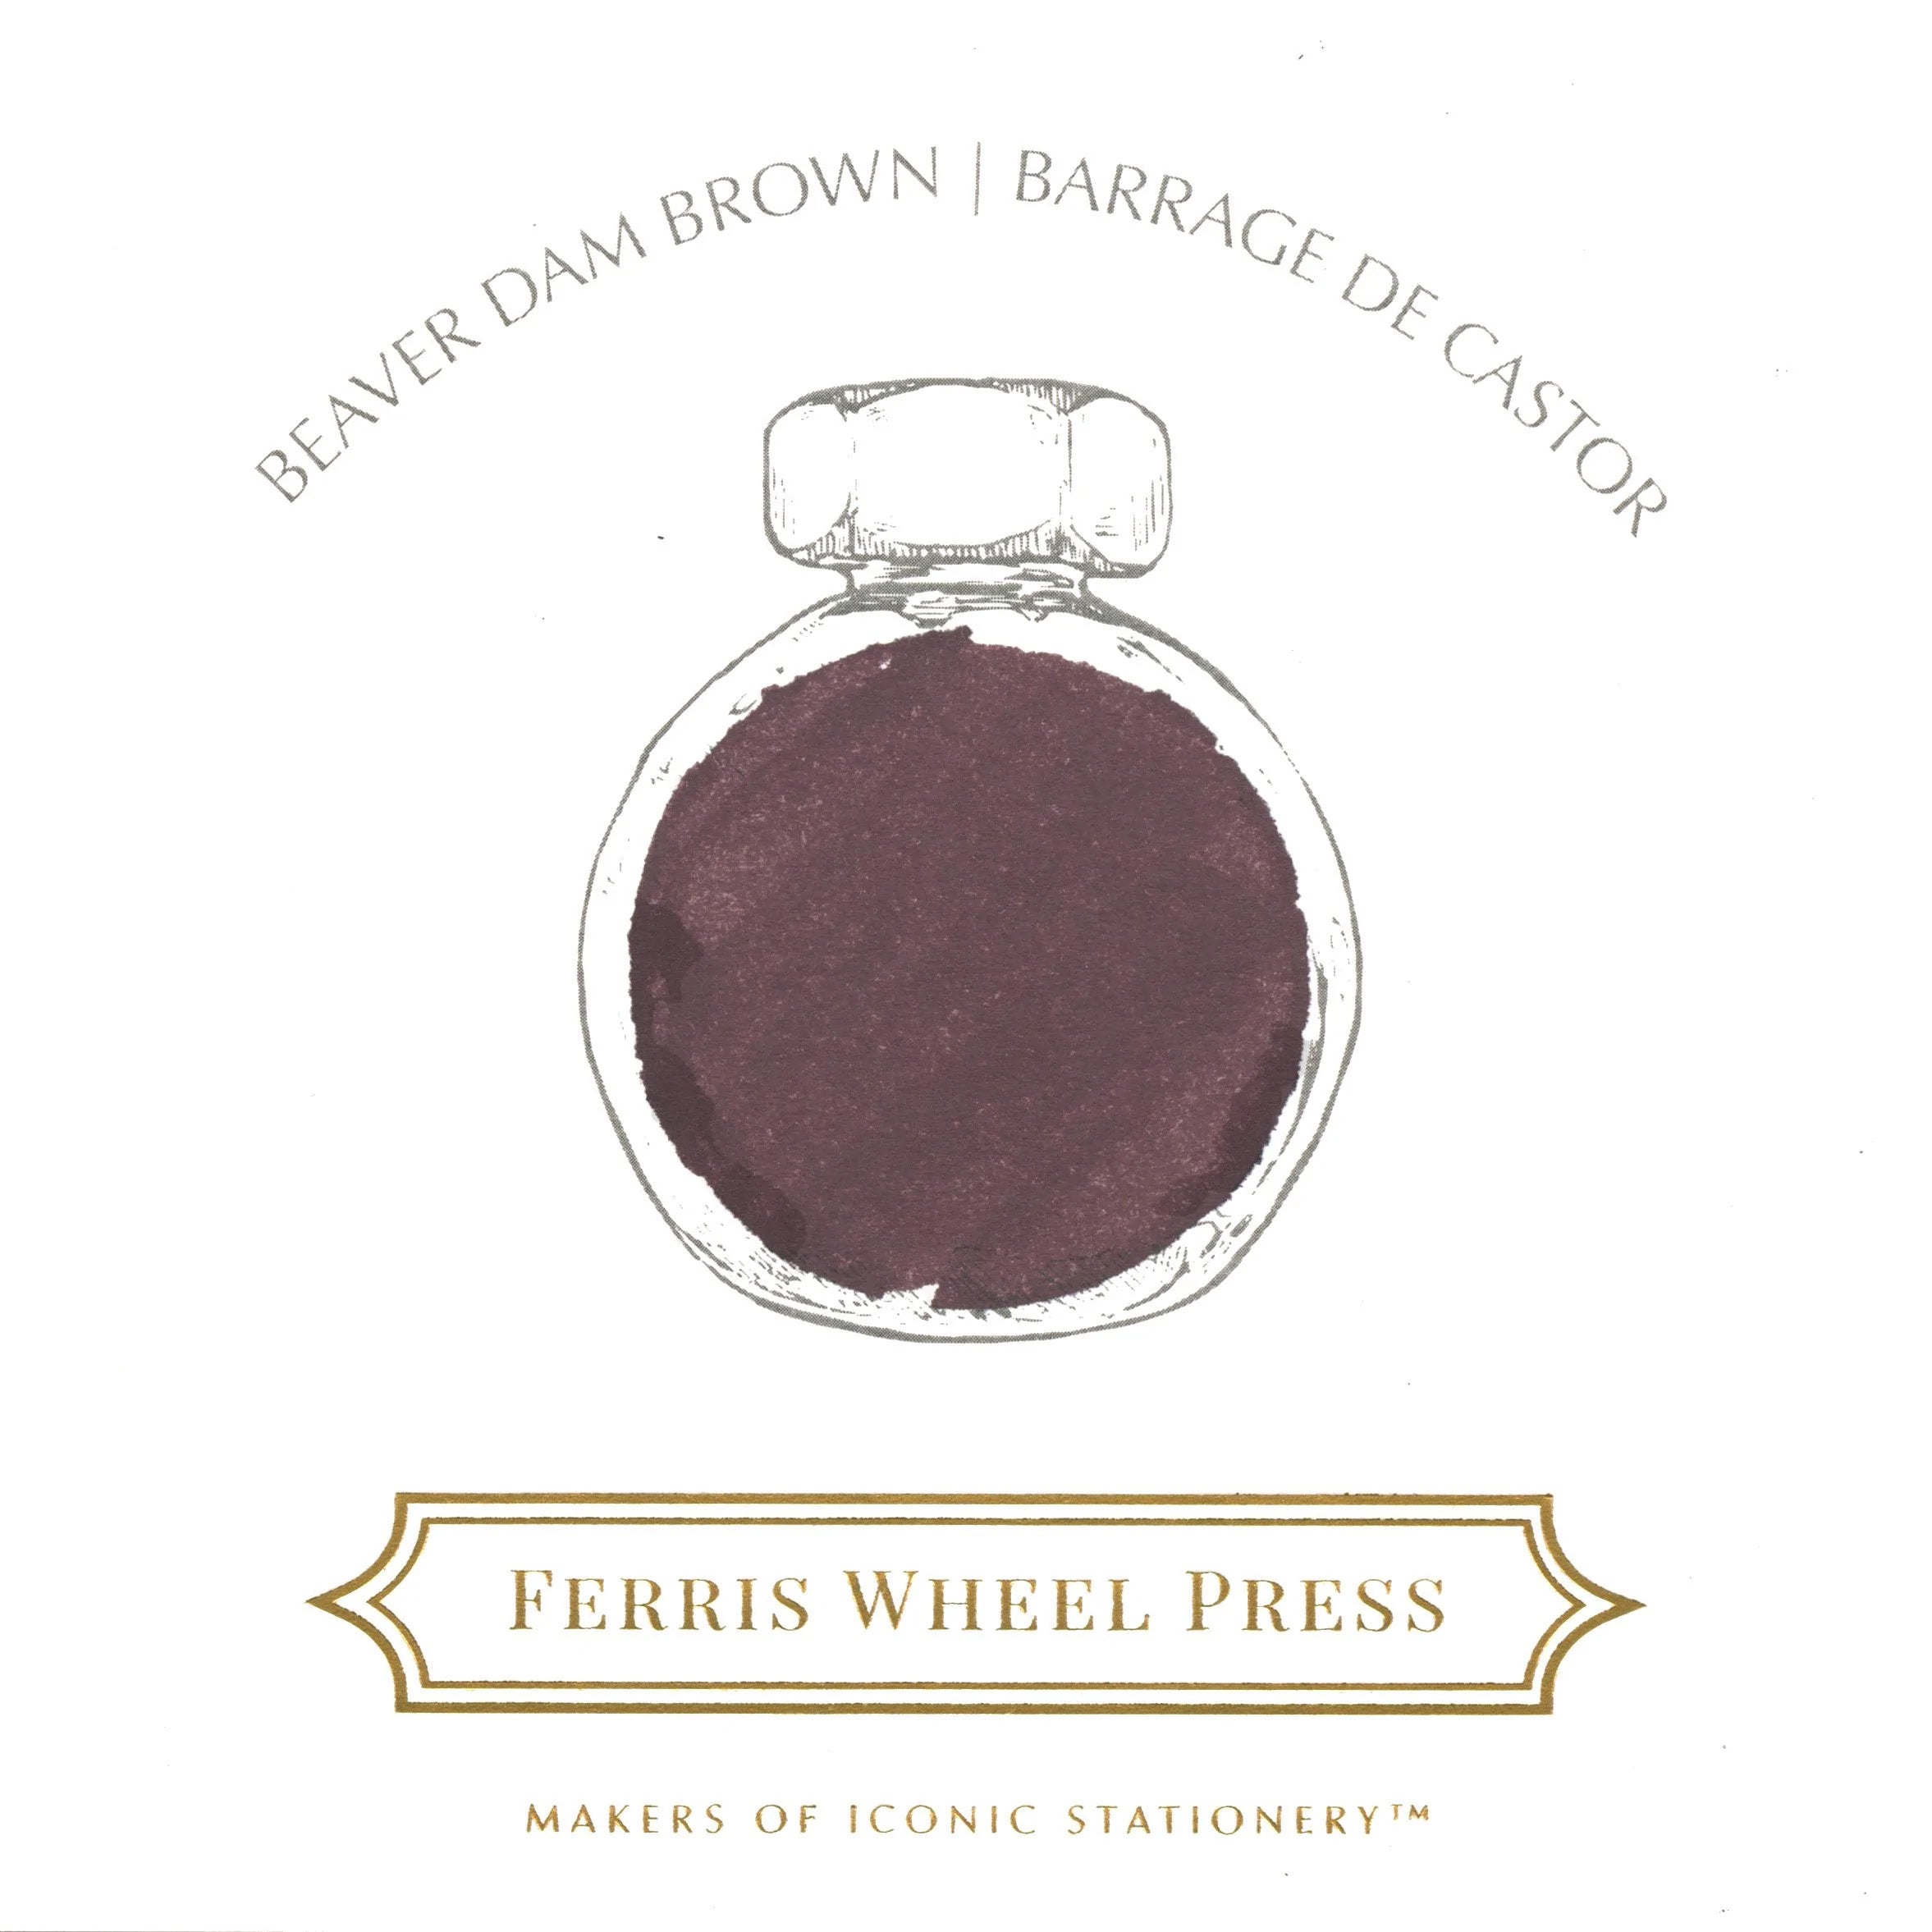 Ferris Wheel Press | Ink Charger Set | Moss Park Collection